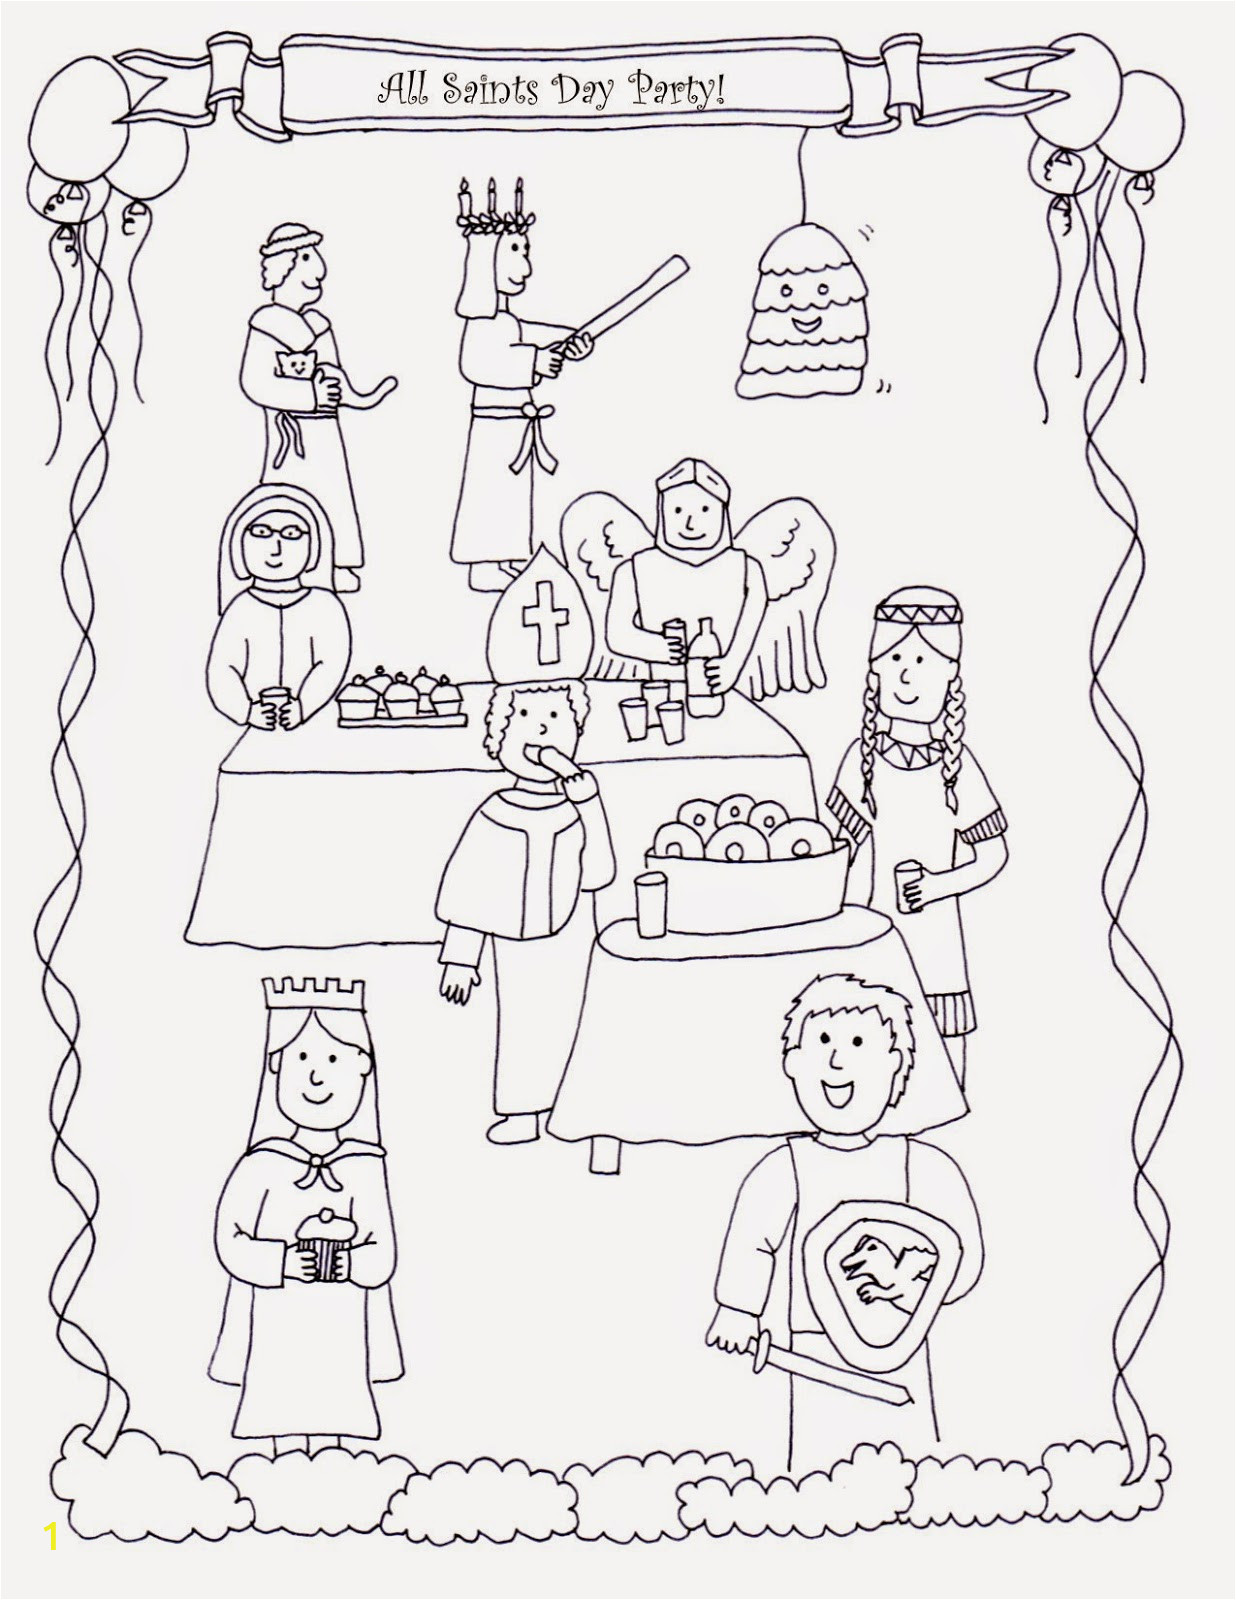 Free Printable All Saints Day Coloring Pages Drawn2bcreative All Saints Day Coloring Page